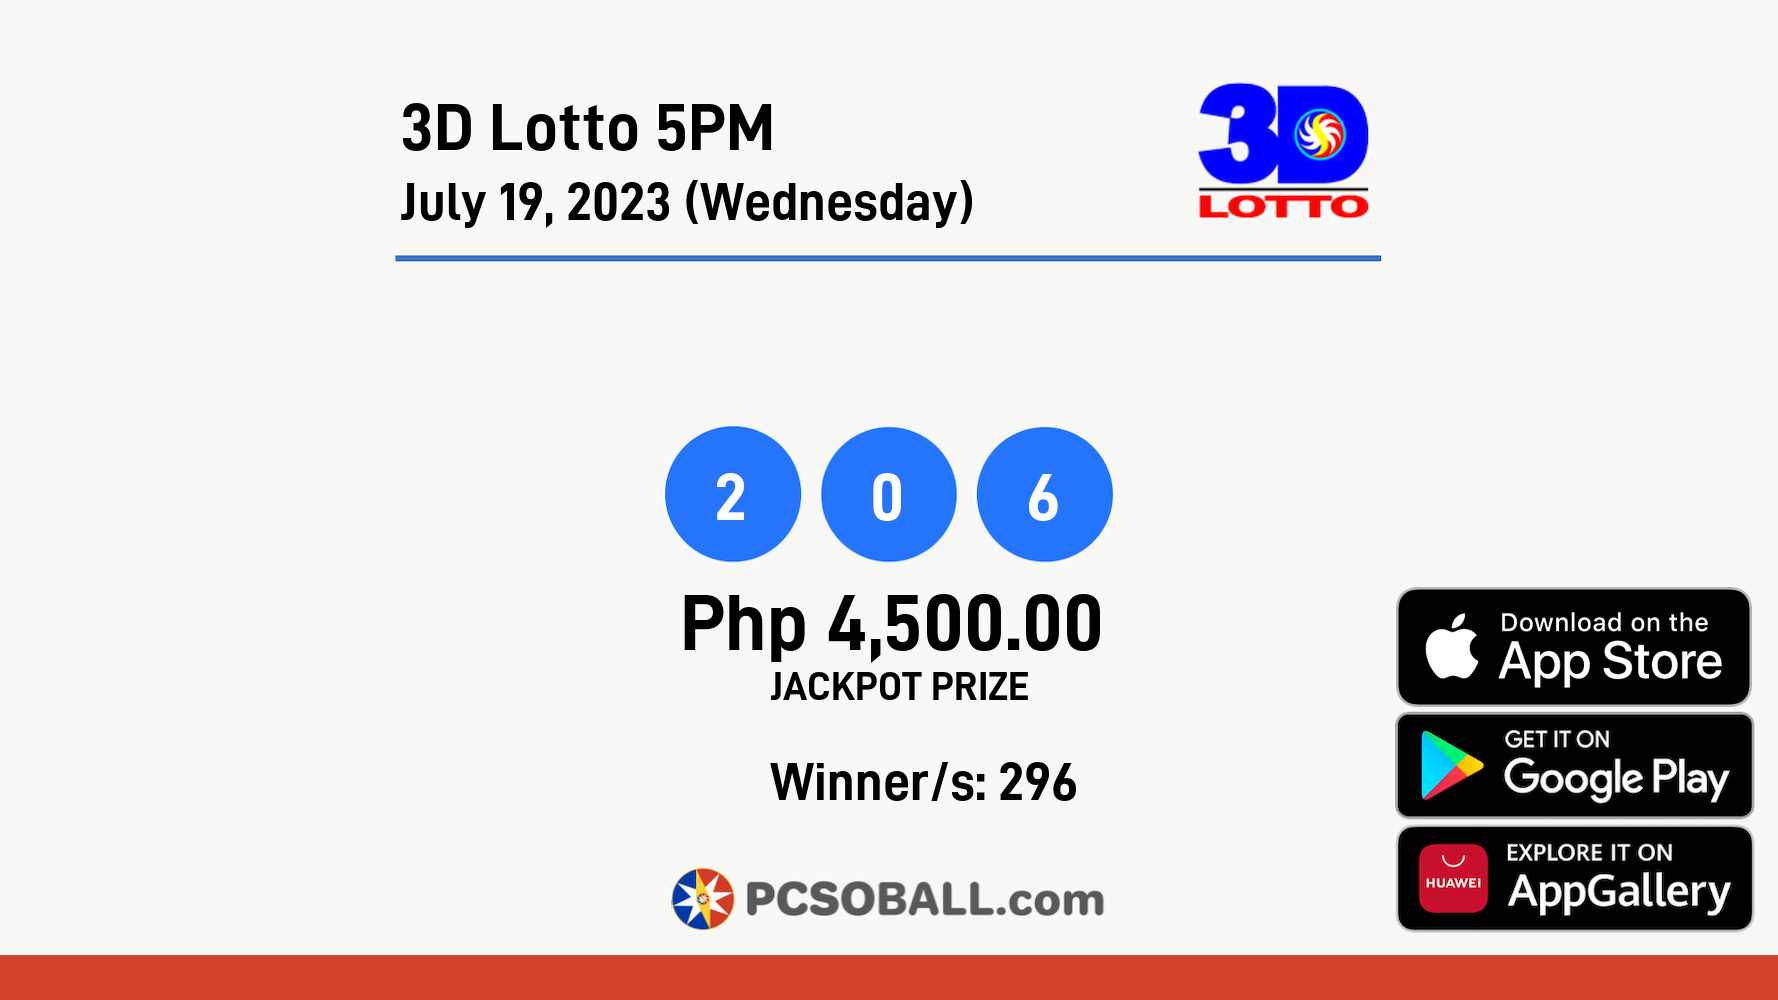 3D Lotto 5PM July 19, 2023 (Wednesday) Result